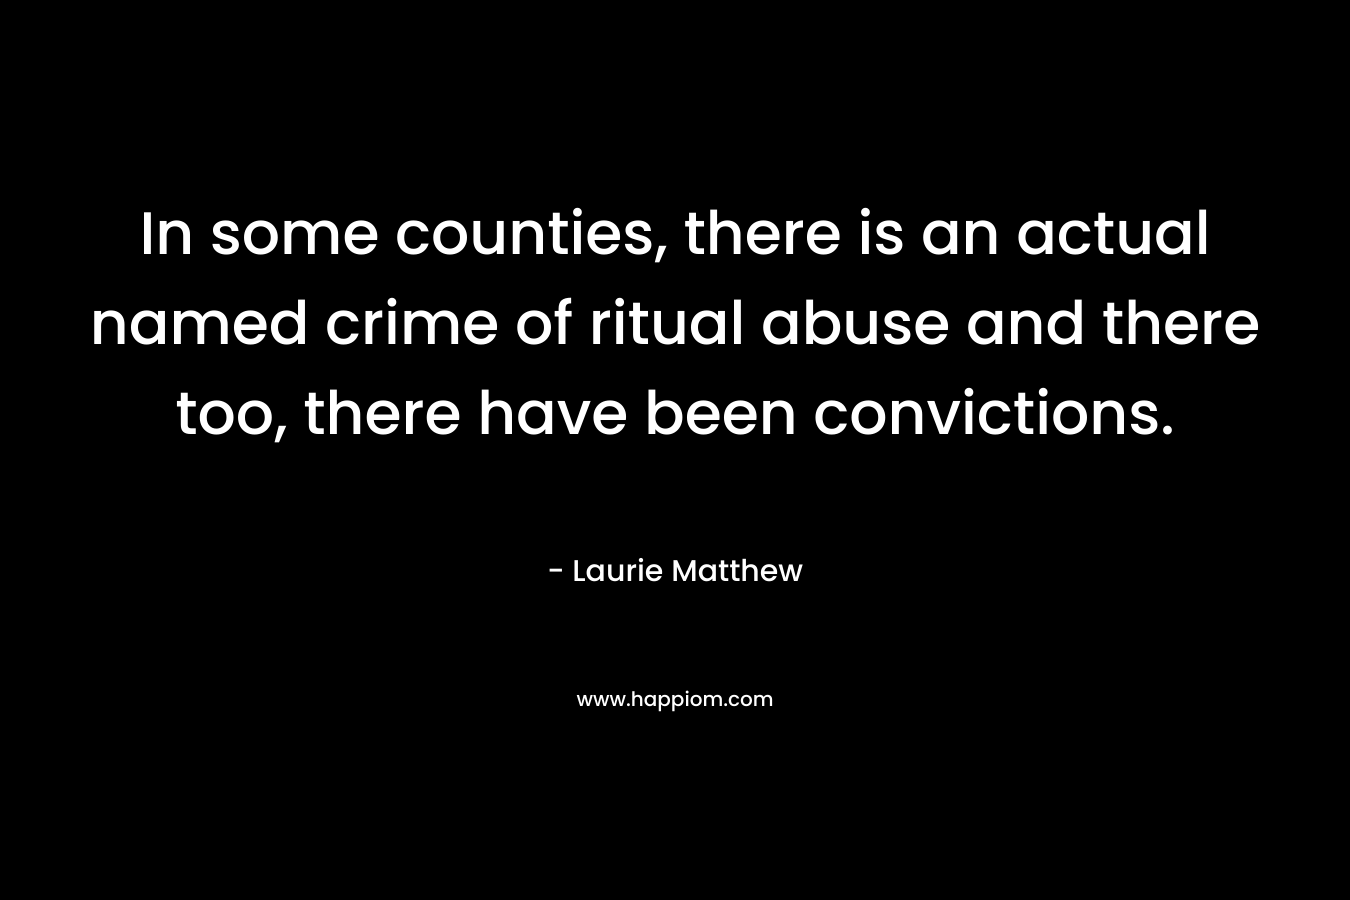 In some counties, there is an actual named crime of ritual abuse and there too, there have been convictions. – Laurie Matthew